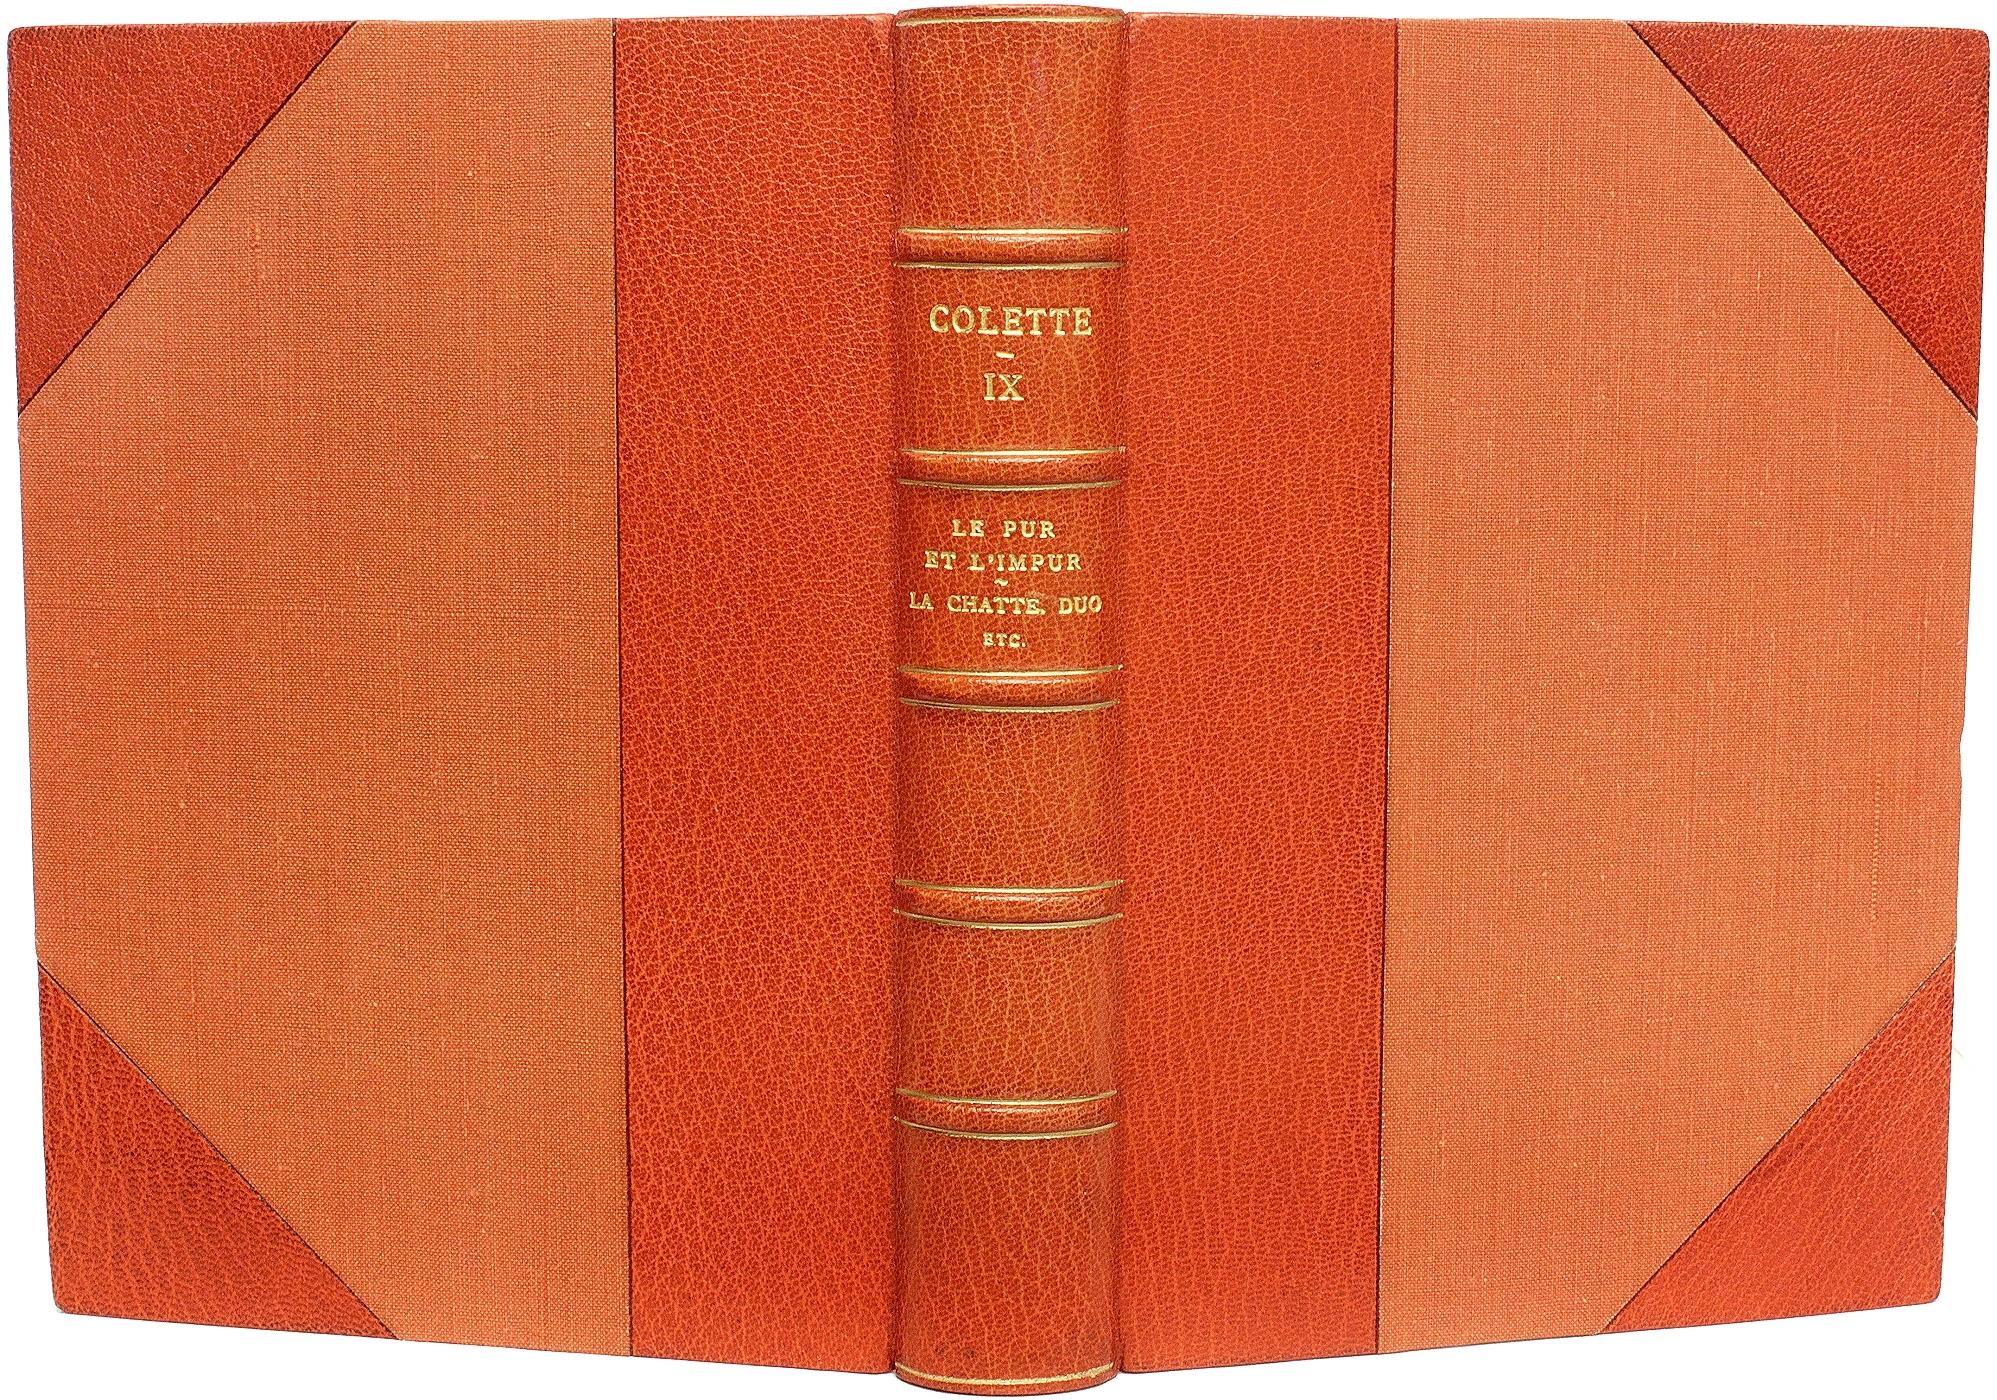 Mid-20th Century Oeuvres Completes De Colette. Complete Works of Colette - FIRST COLLECTED EDITON For Sale